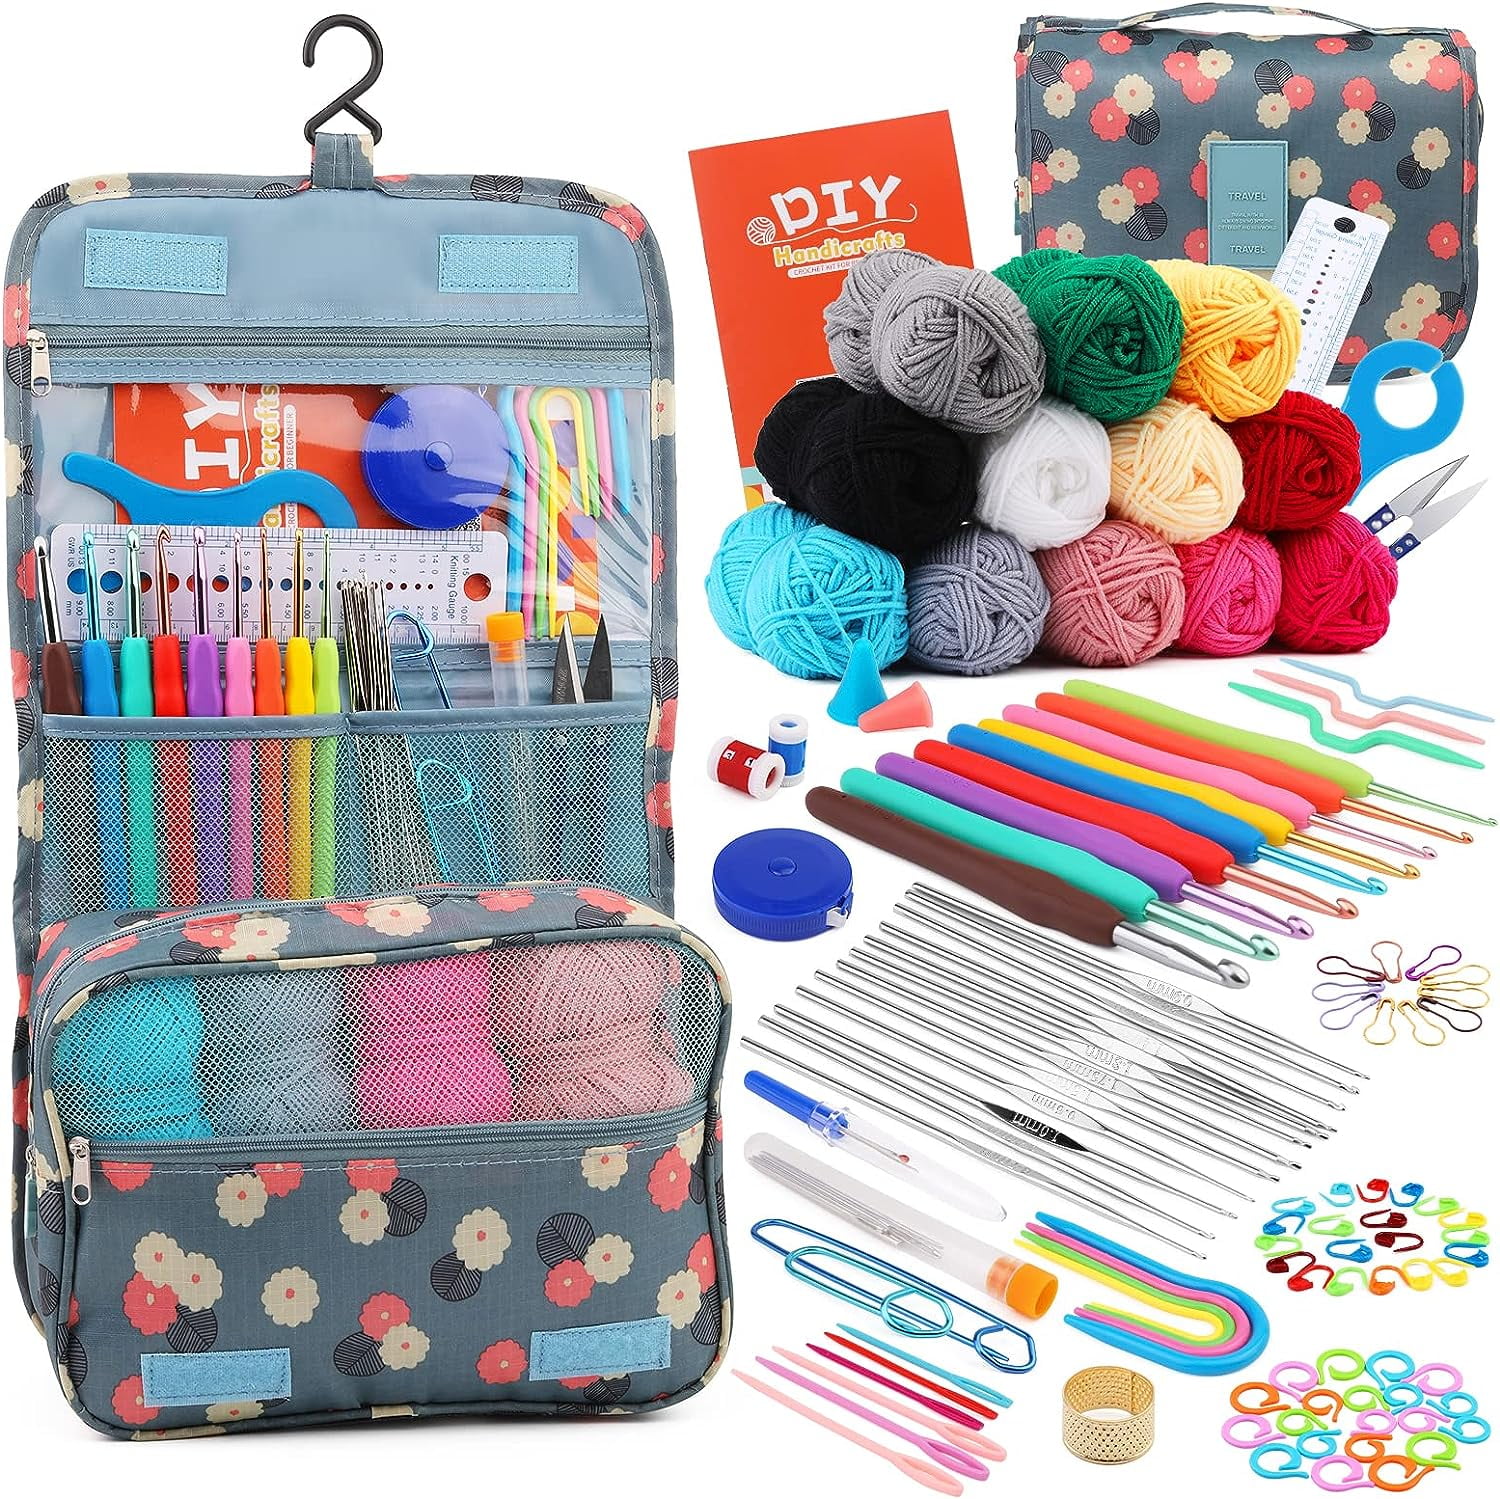 Crochet Kits for Beginners with Case, 78PCS Crochet Hooks Set Beginners  Crochet Kit with Canvas Tote Bag, 10 Yarns and Crochet Hooks, Knitting